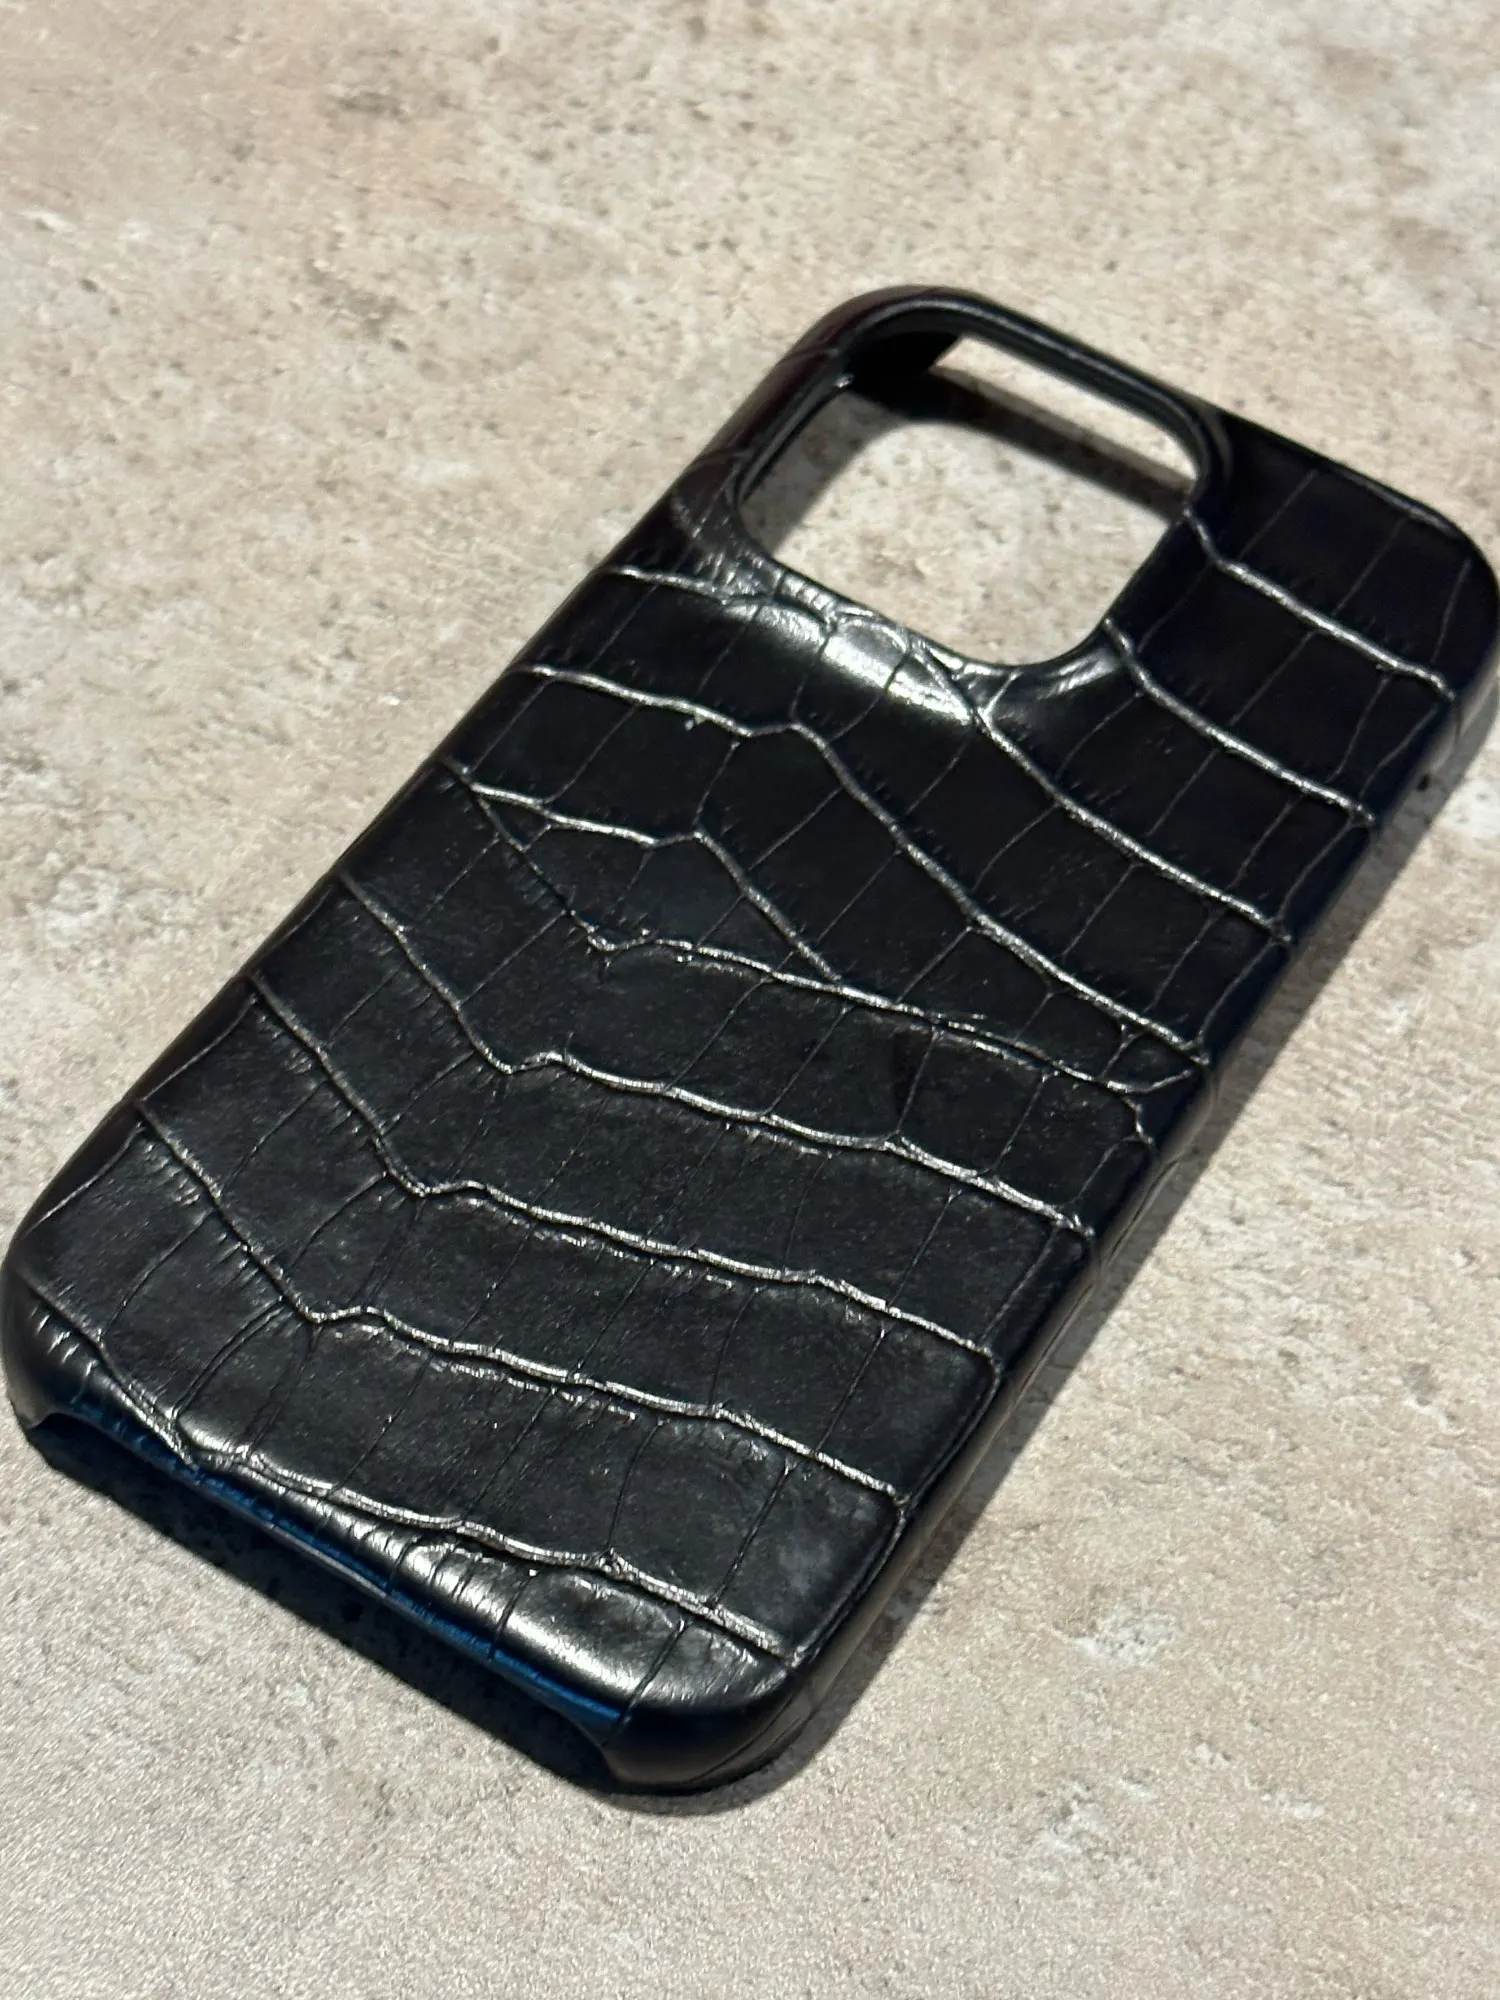 Crocodile Grain Leather - Case for iPhone photo review